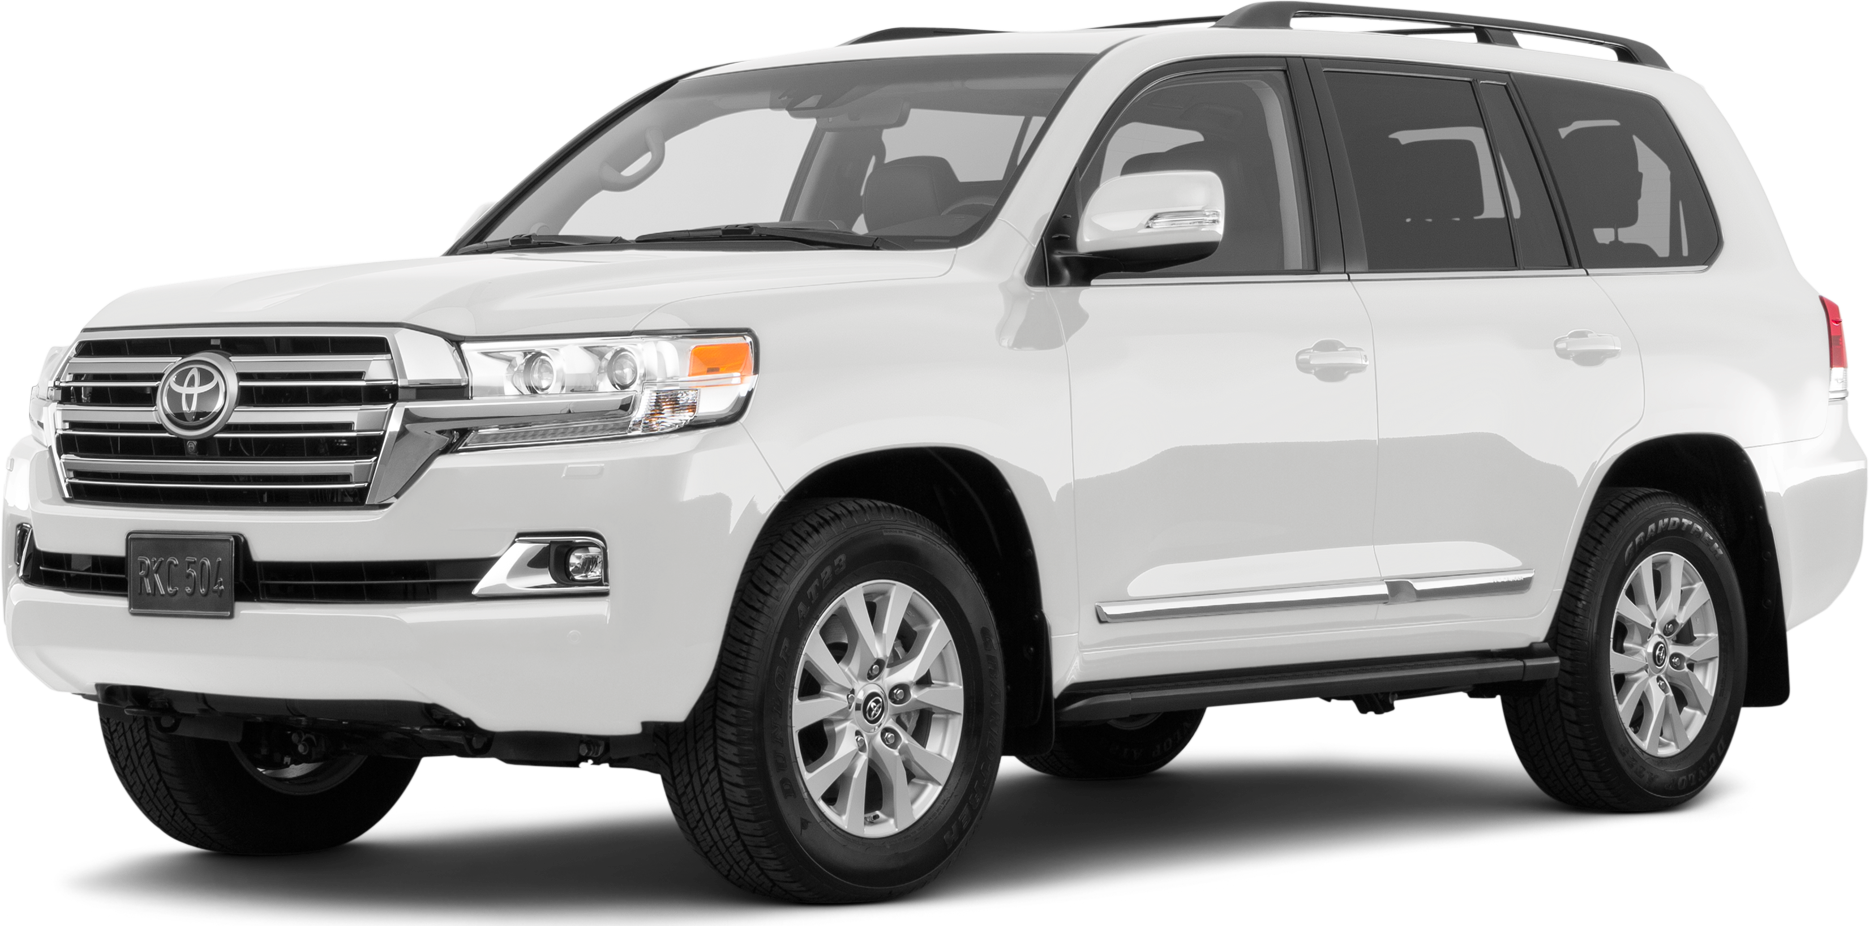 2017 Toyota Land Cruiser Values & Cars for Sale | Kelley Blue Book